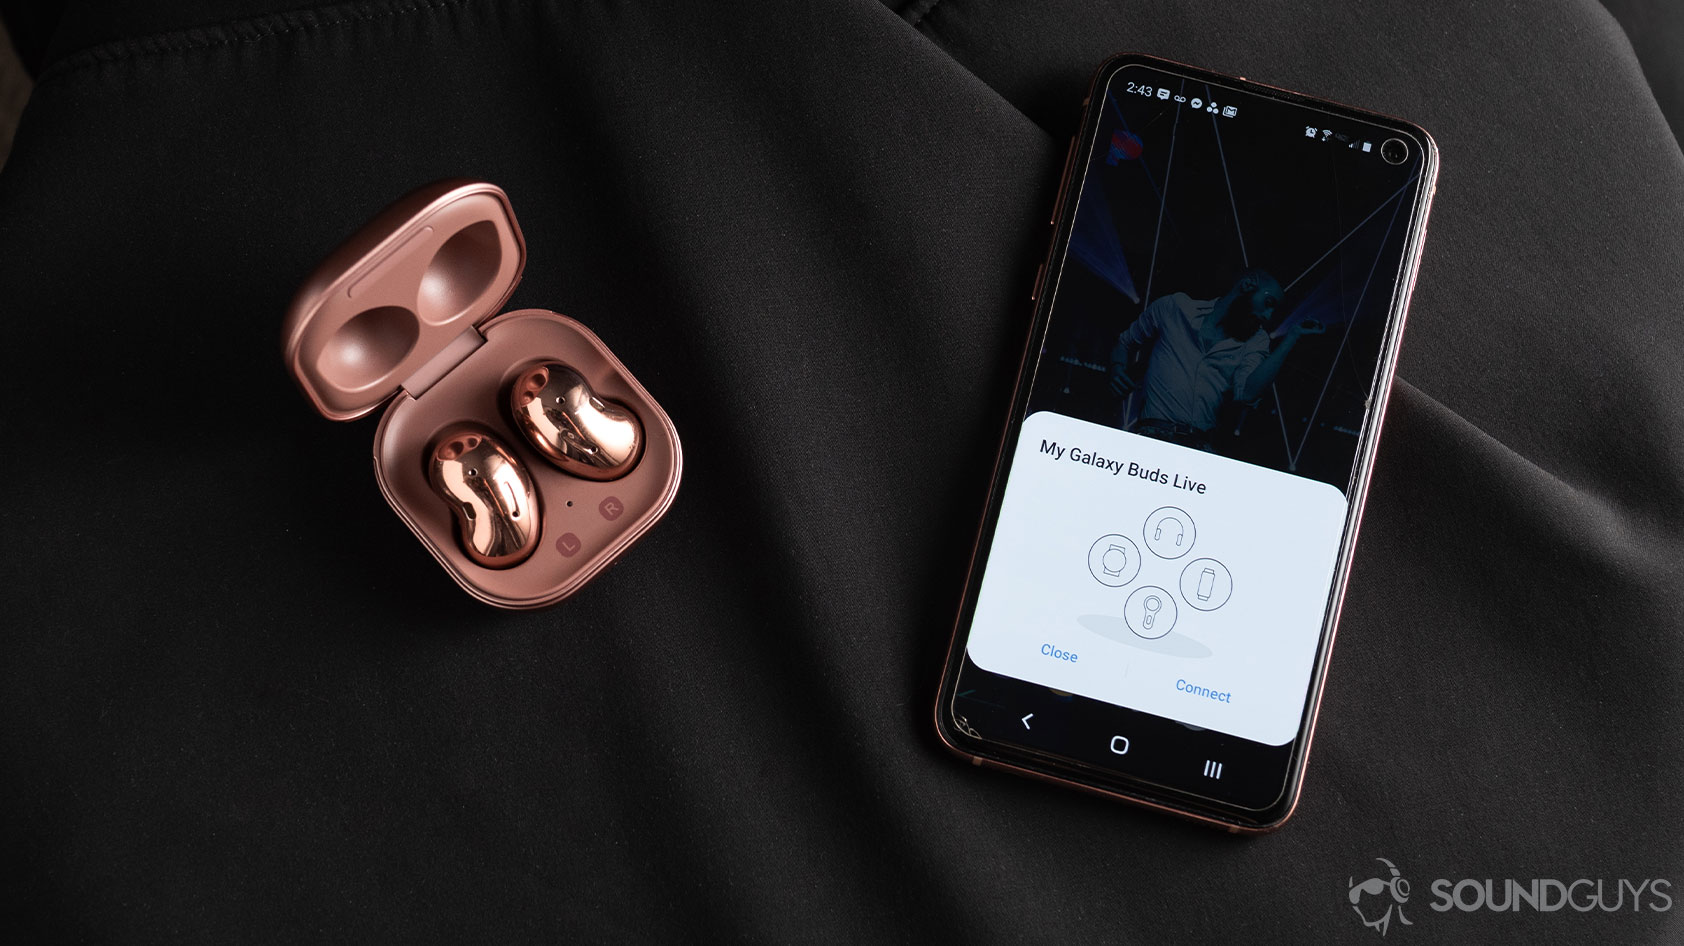 A picture of the Samsung Galaxy Buds Live noise canceling true wireless earbuds in the open case next to a Samsung Galaxy S10e smartphone with quick pairing.